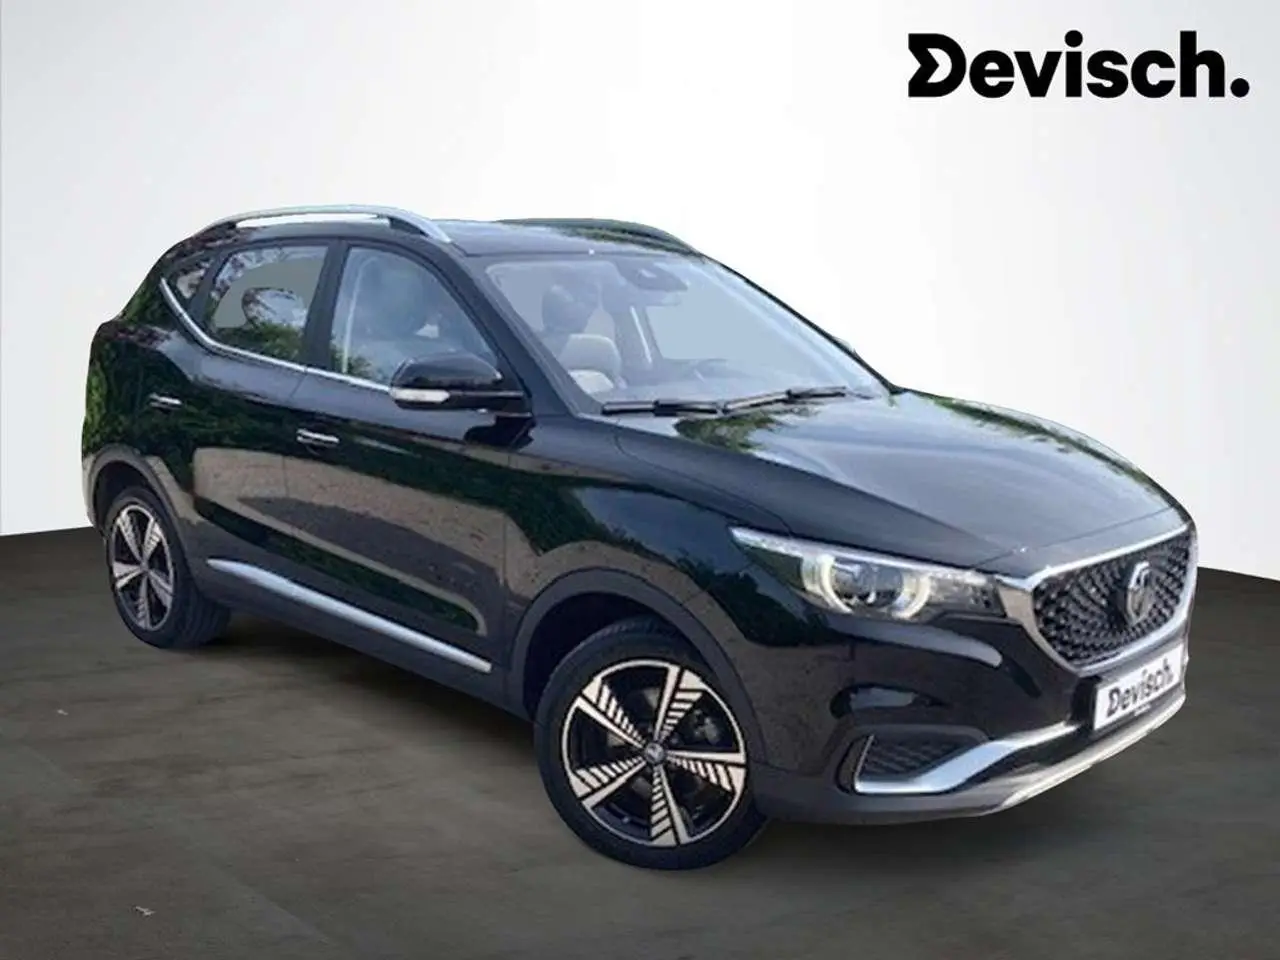 Photo 1 : Mg Zs 2021 Electric